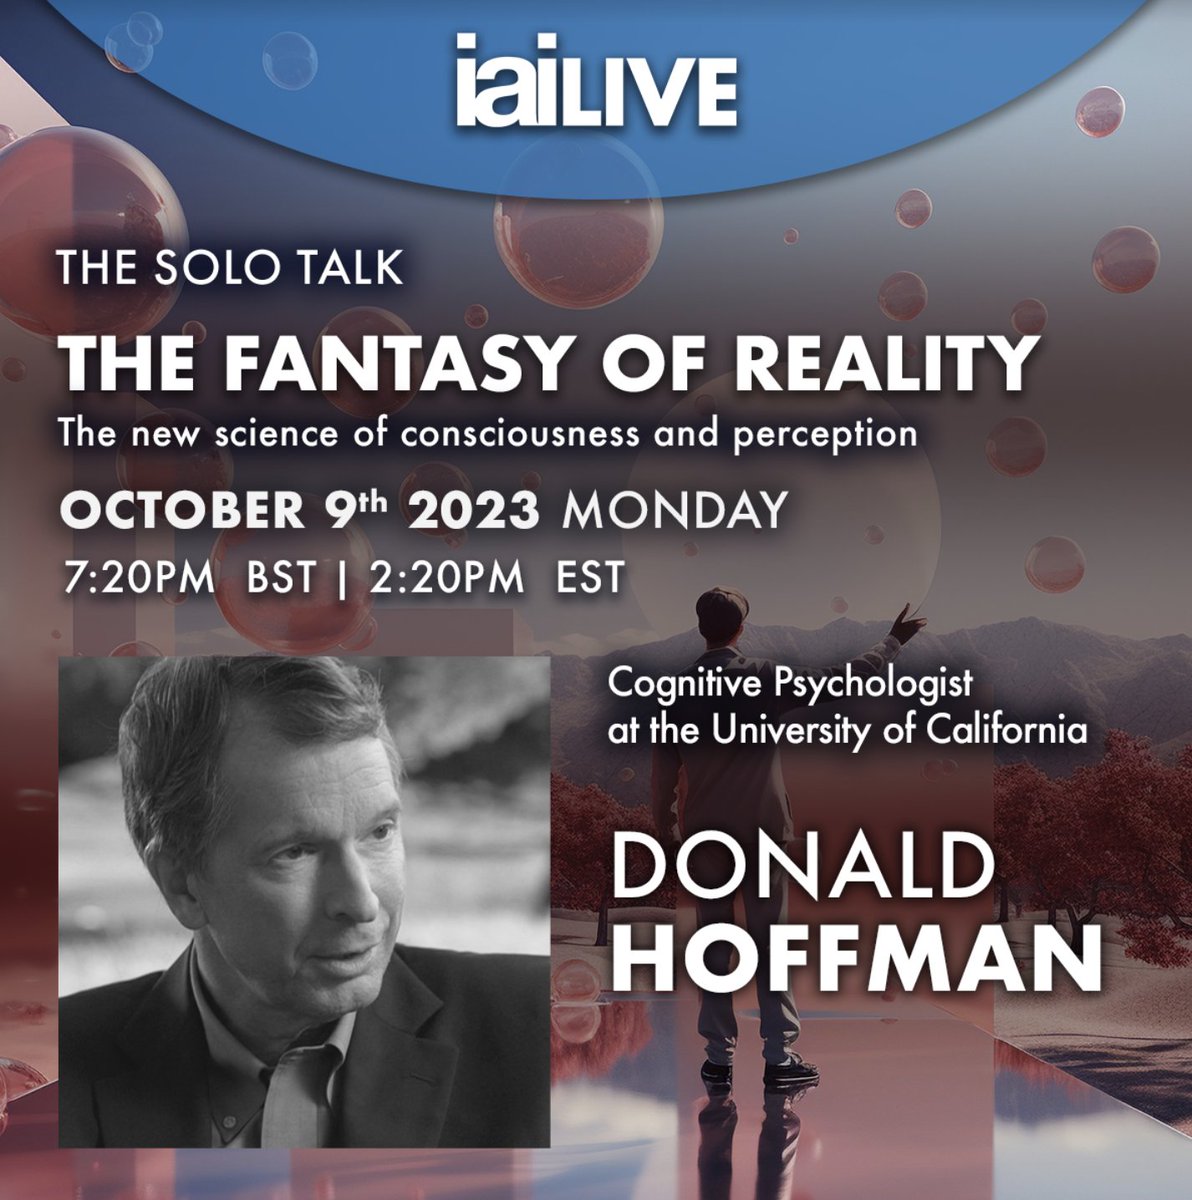 TOMORROW | Join Donald Hoffman (@donalddhoffman) and delve deeply into his exciting new work on consciousness, perception and reality as part of the @IAI_TV Live October event program. 🎟️ Use discount code CLOSEROCT50 for 50% off below: iai.tv/live/'